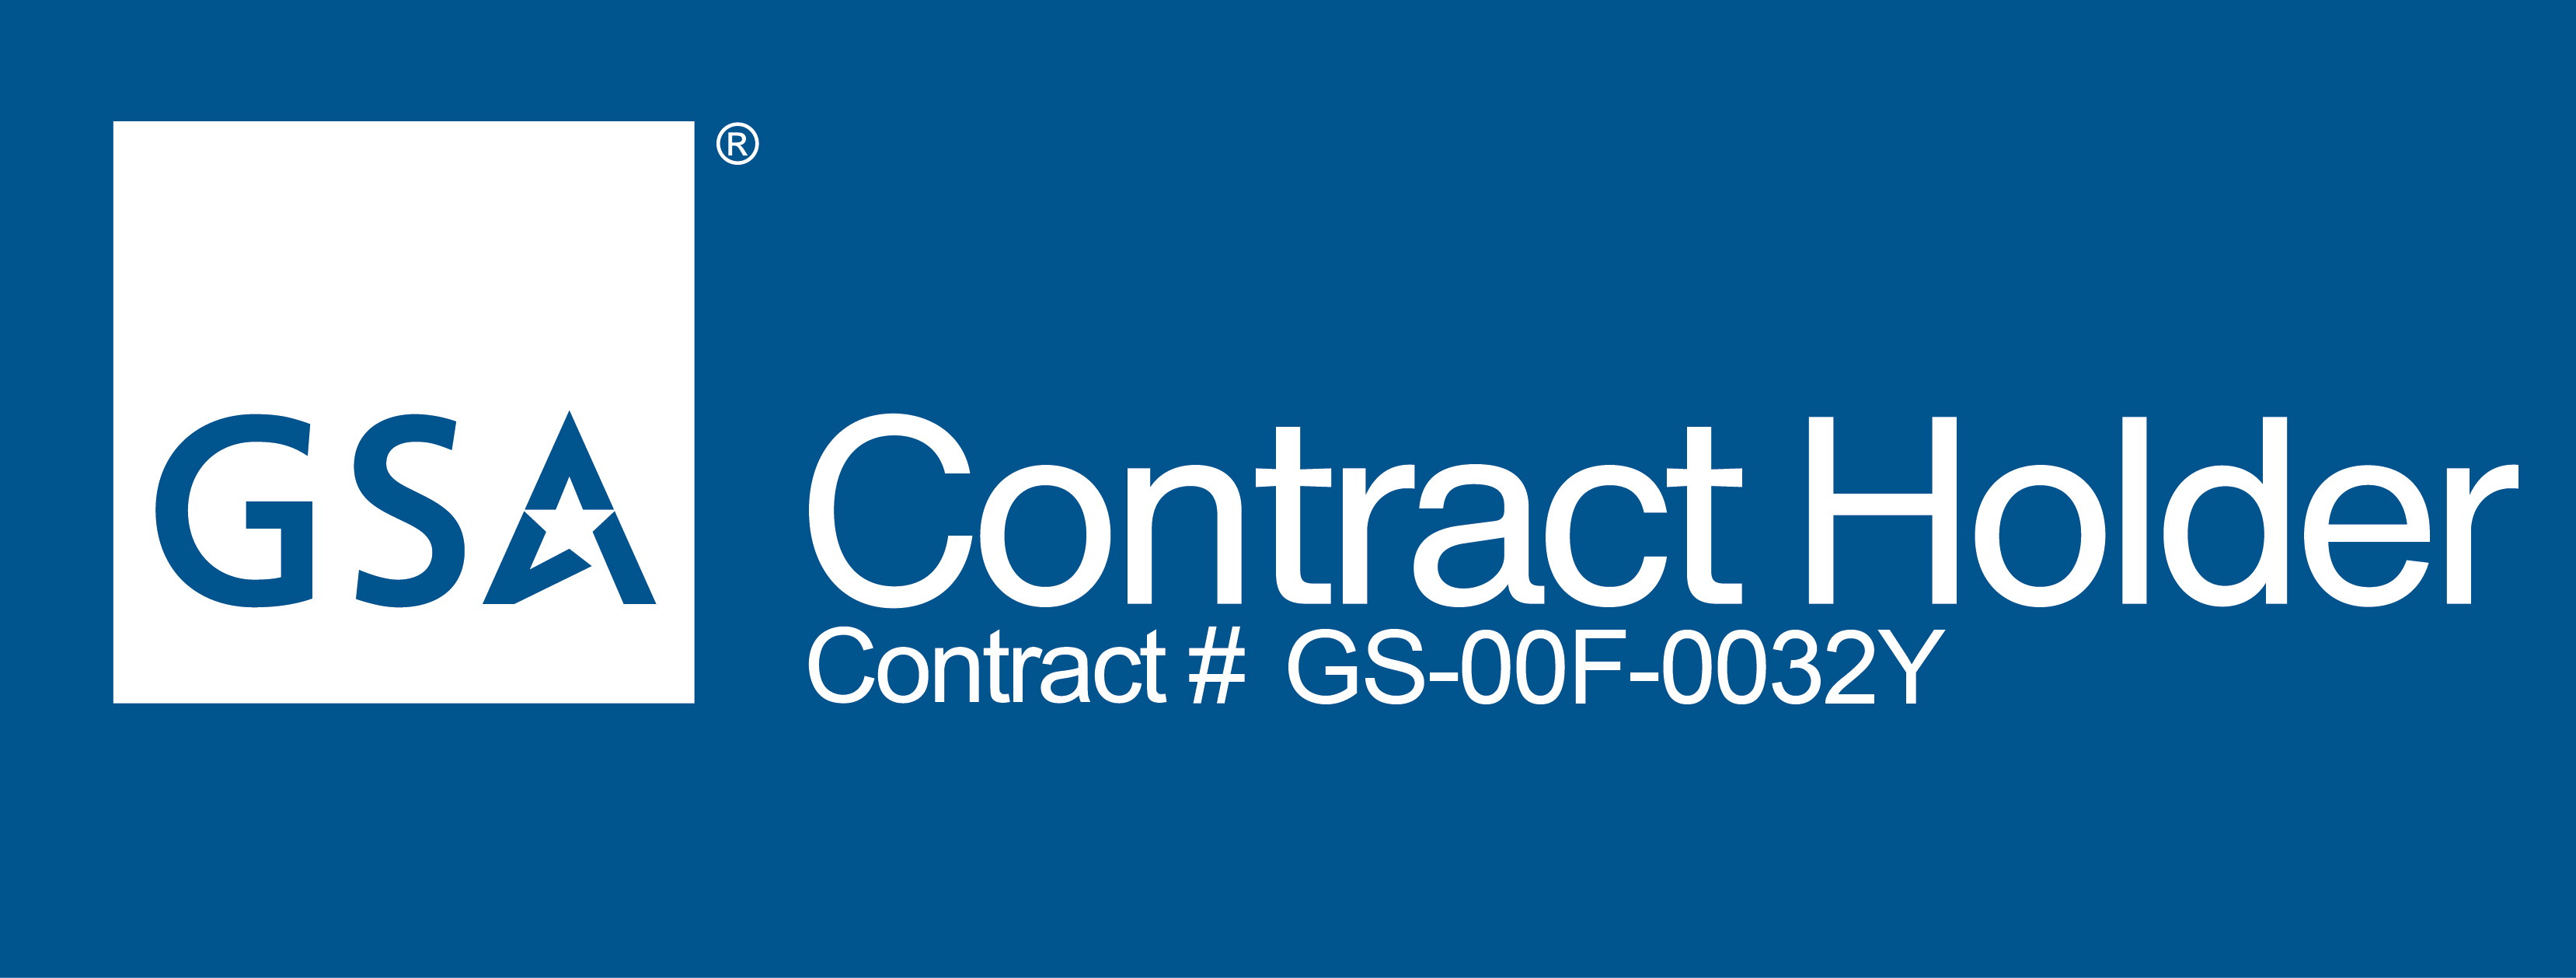 GSA Contract Holder logo Contract number GS-00F-0032Y